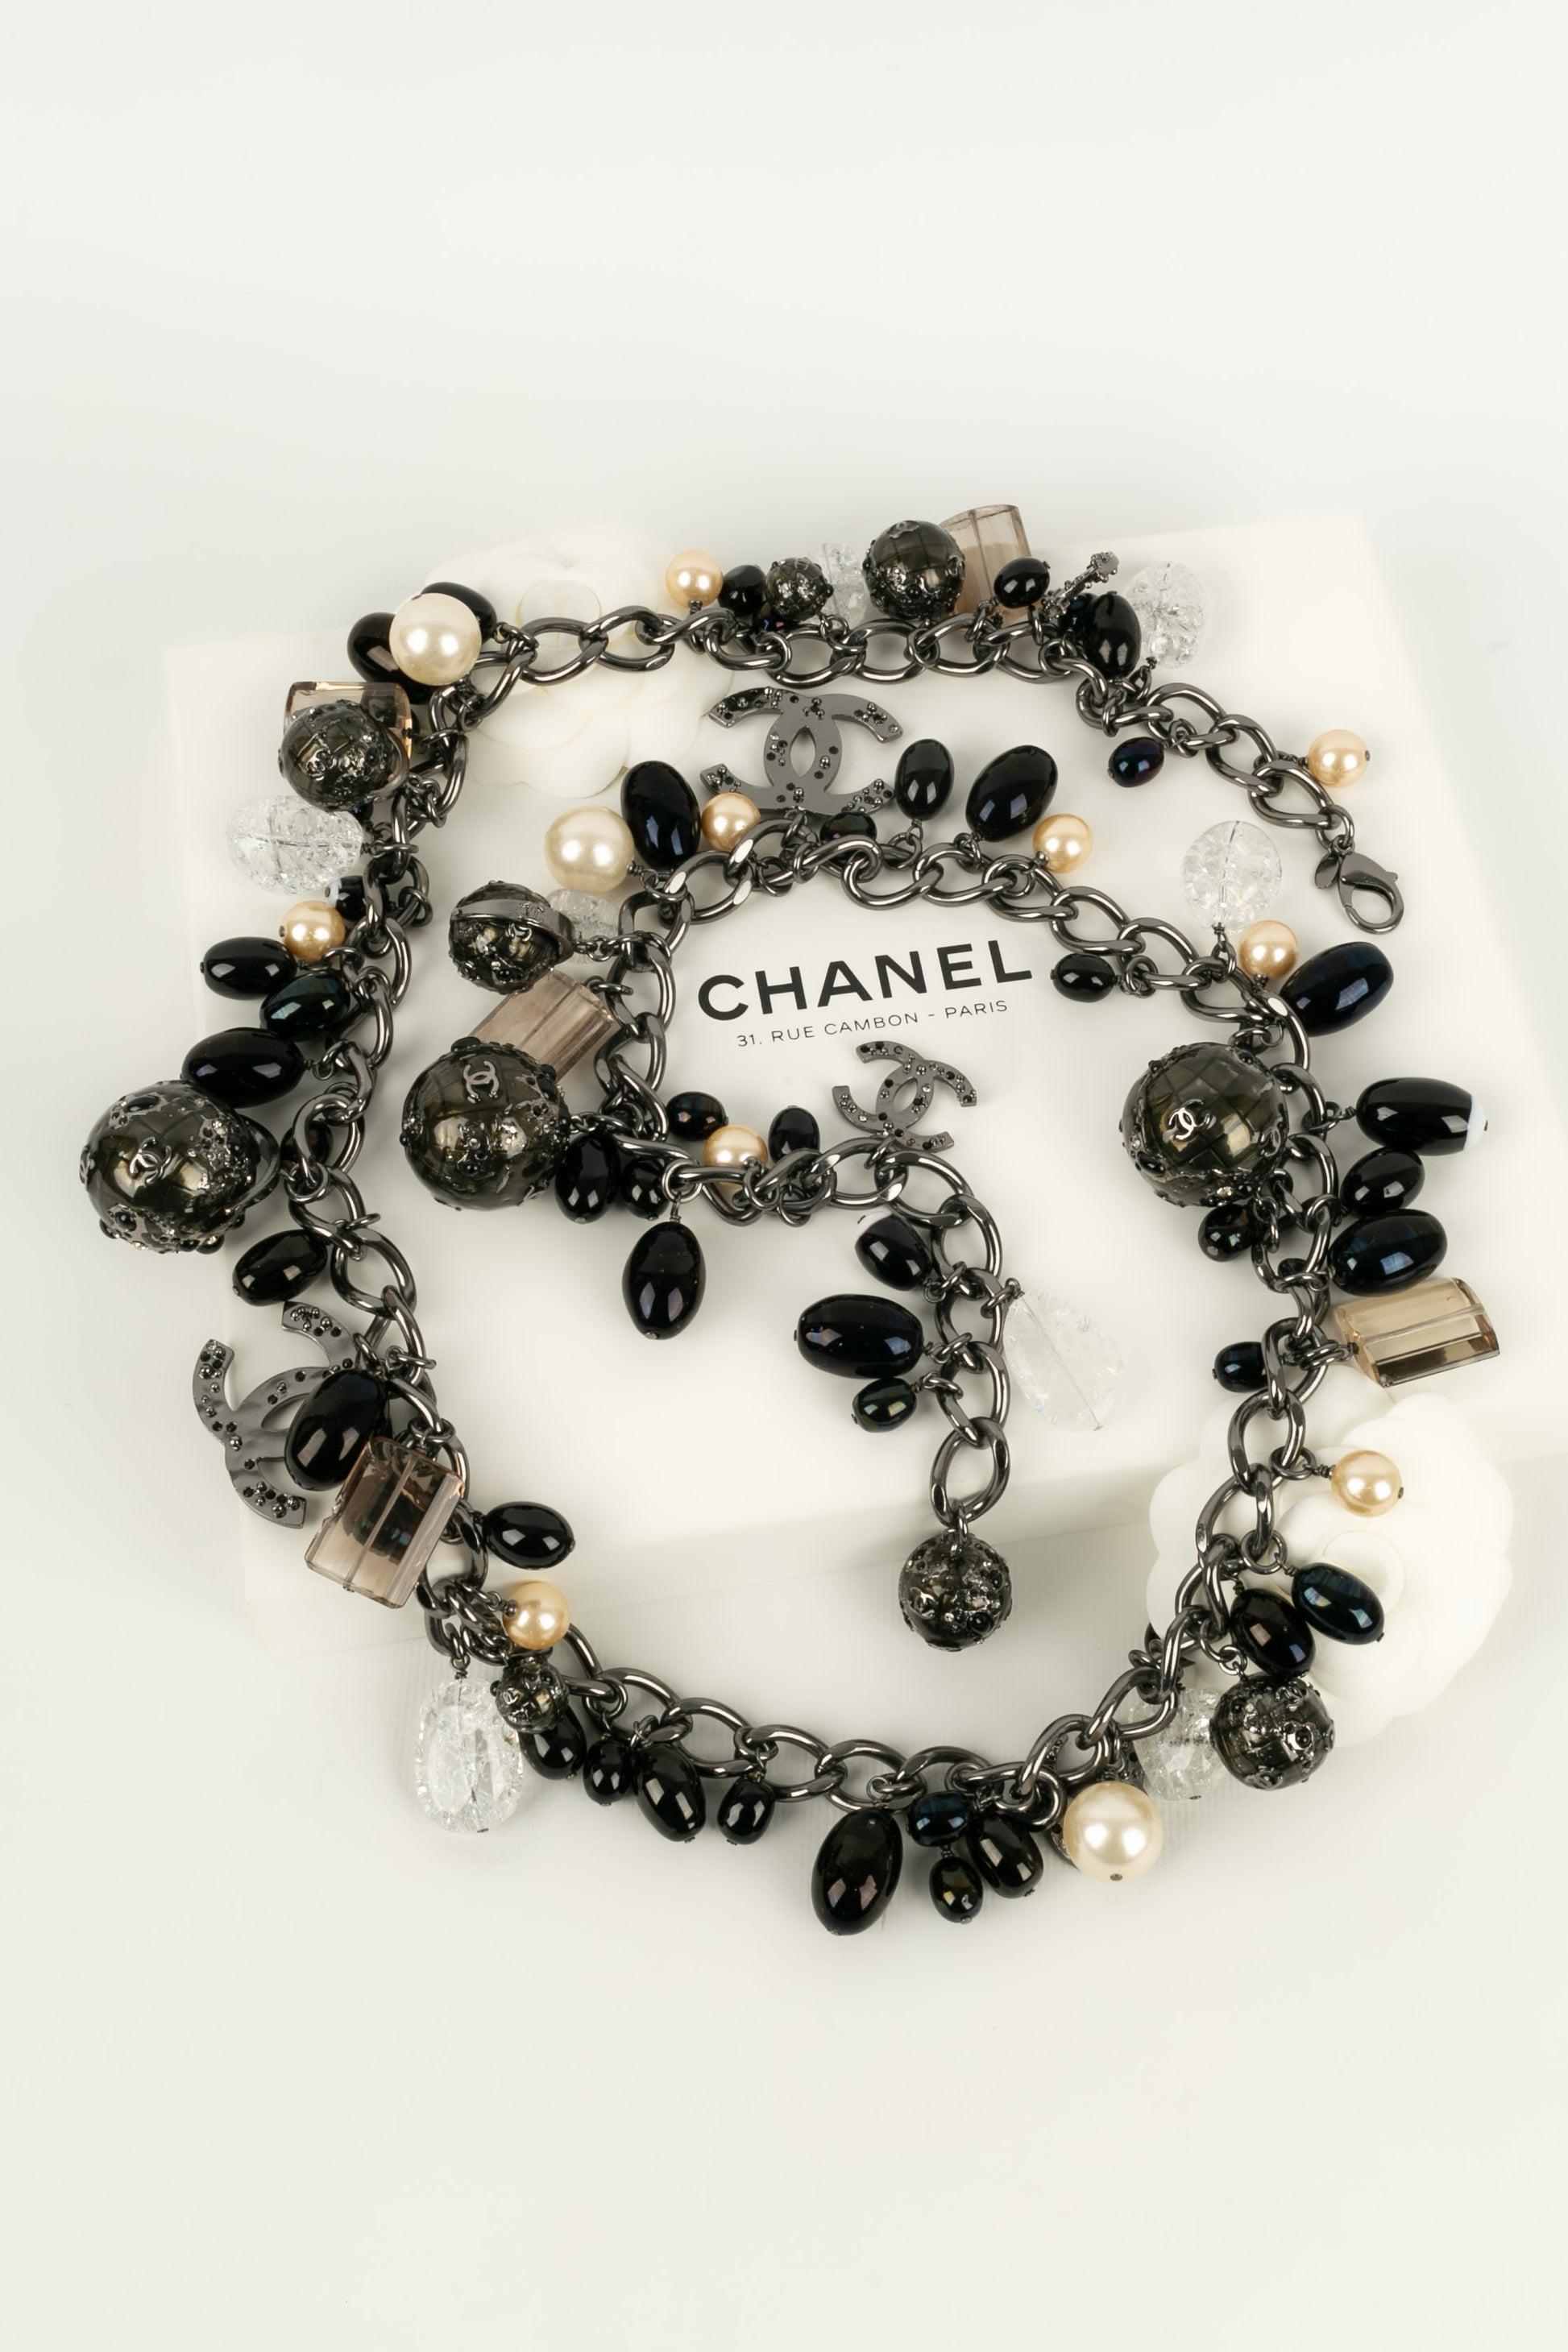 Chanel Necklace in Dark Silver Plated Metal in Black and Pearly Tones, 2004 For Sale 7